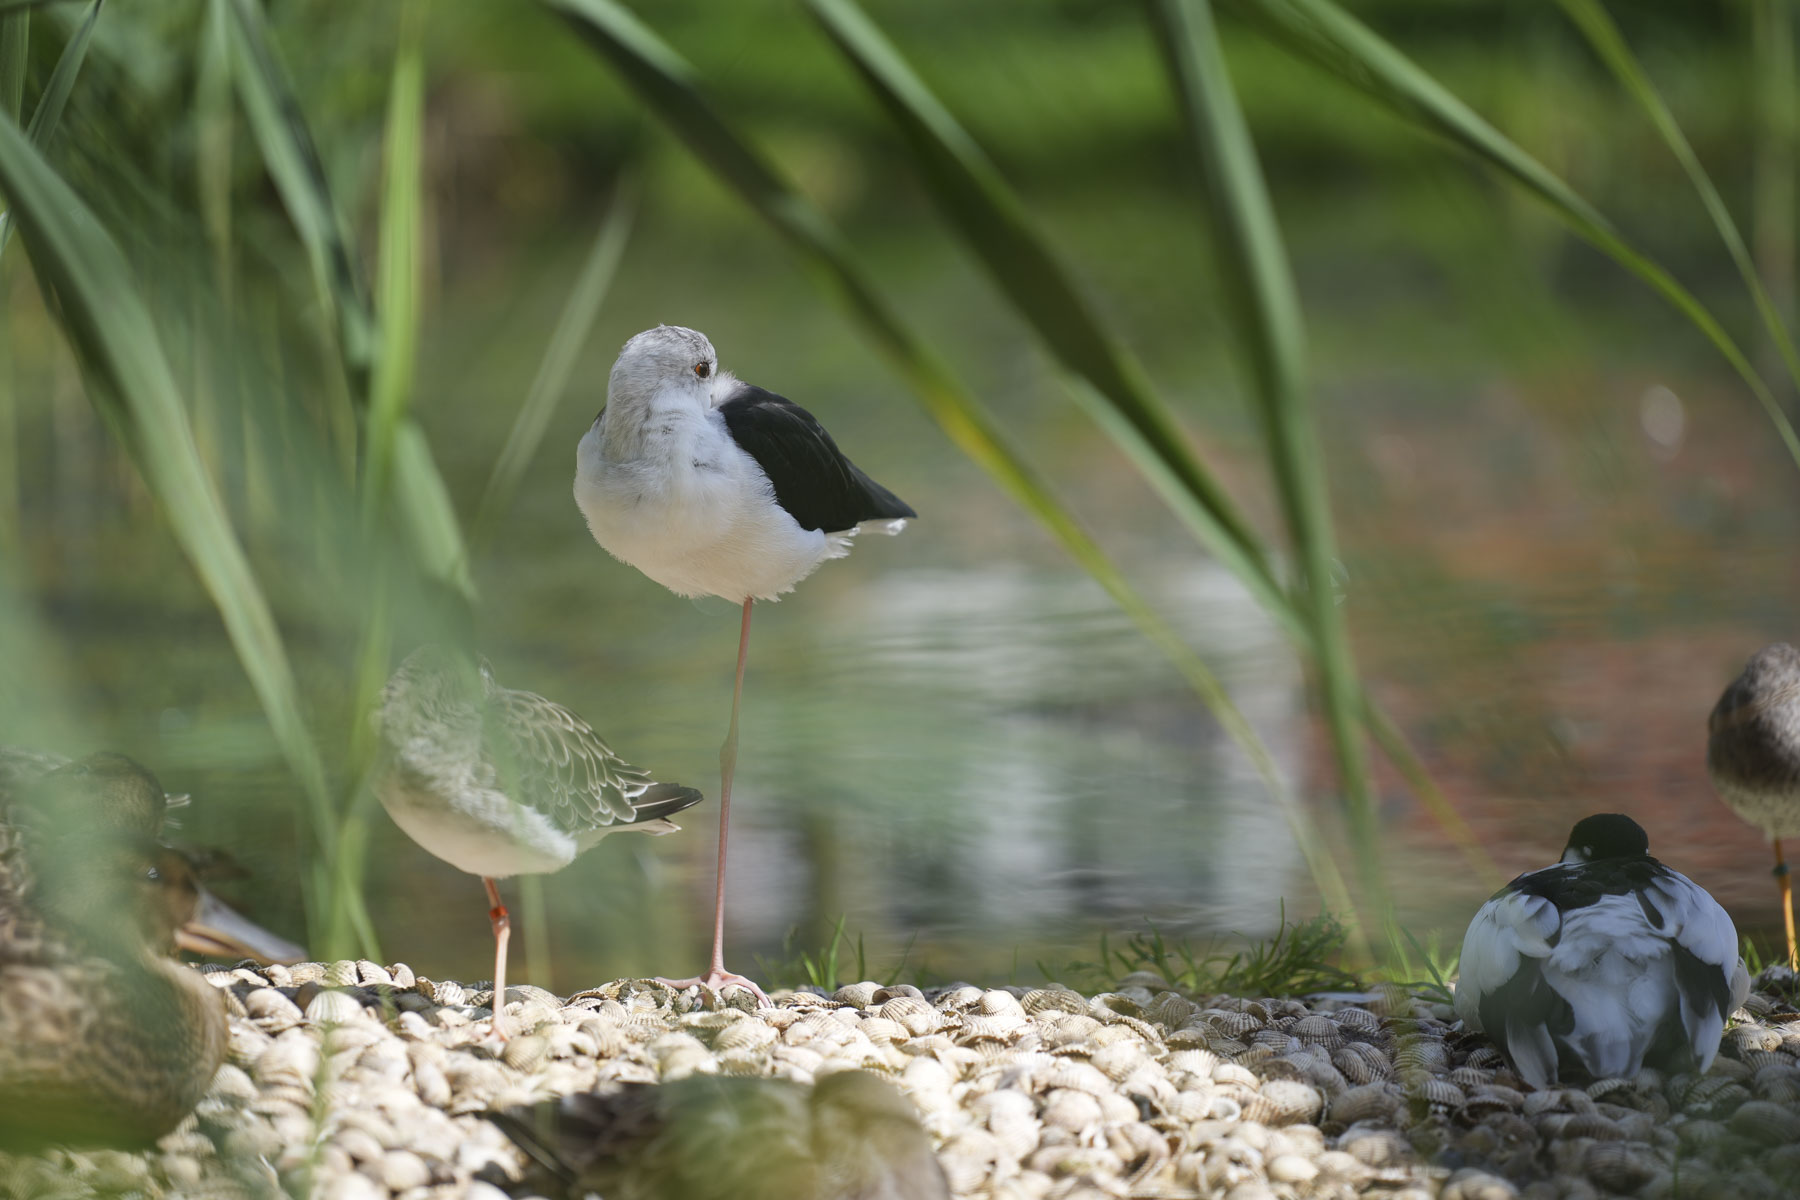 Wildlife photo of a bird standing next to water, captured with the Sony A7C II full-frame mirrorless camera